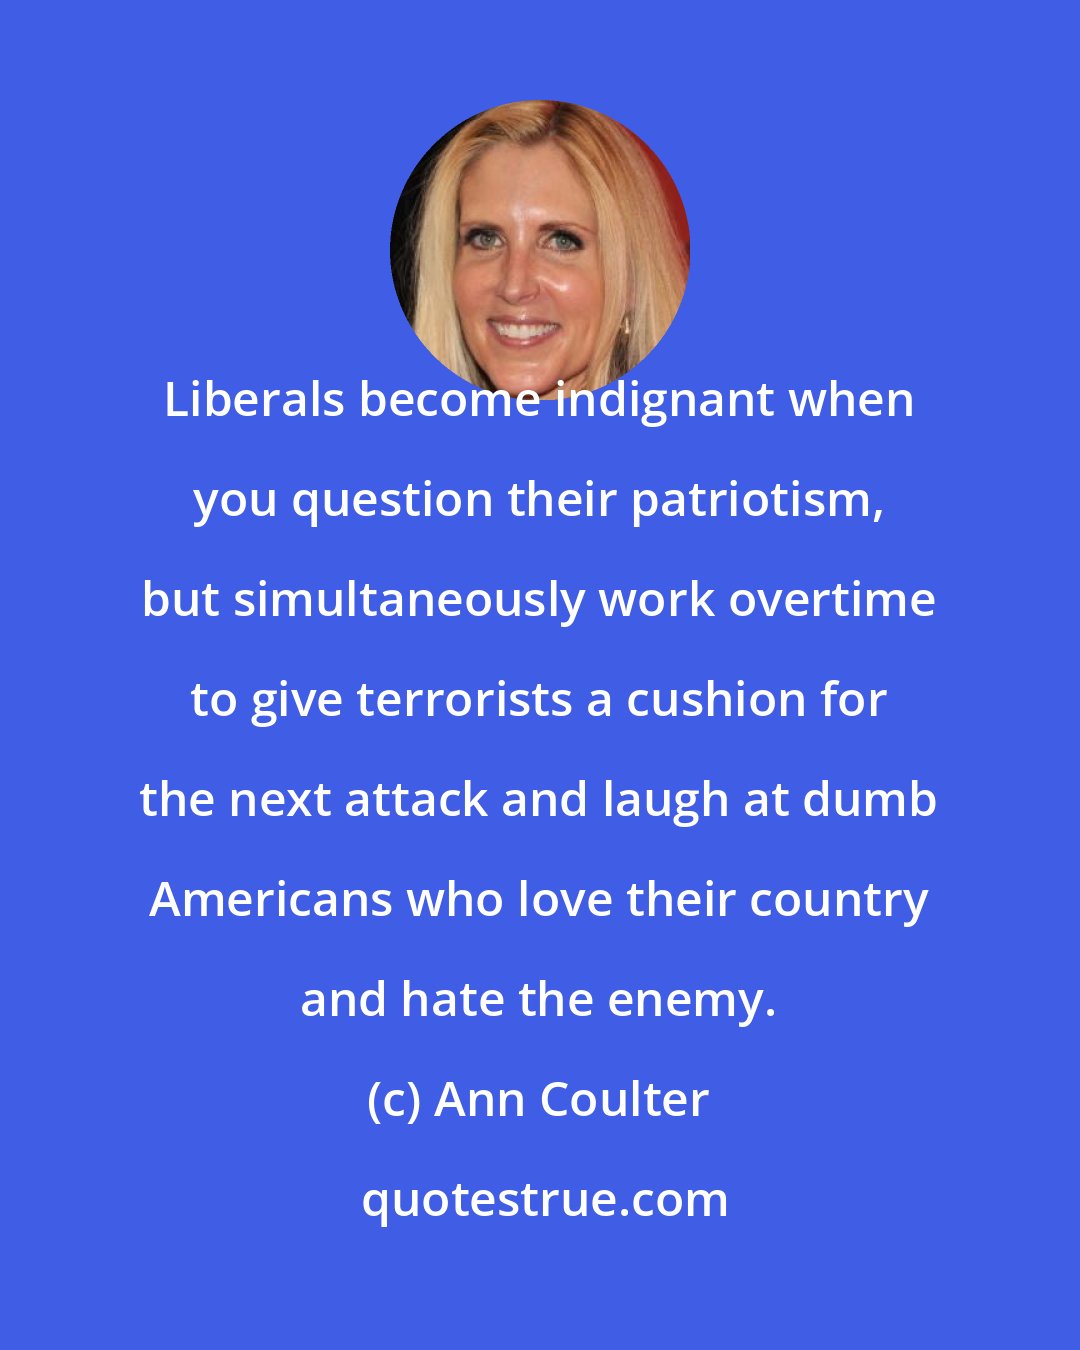 Ann Coulter: Liberals become indignant when you question their patriotism, but simultaneously work overtime to give terrorists a cushion for the next attack and laugh at dumb Americans who love their country and hate the enemy.